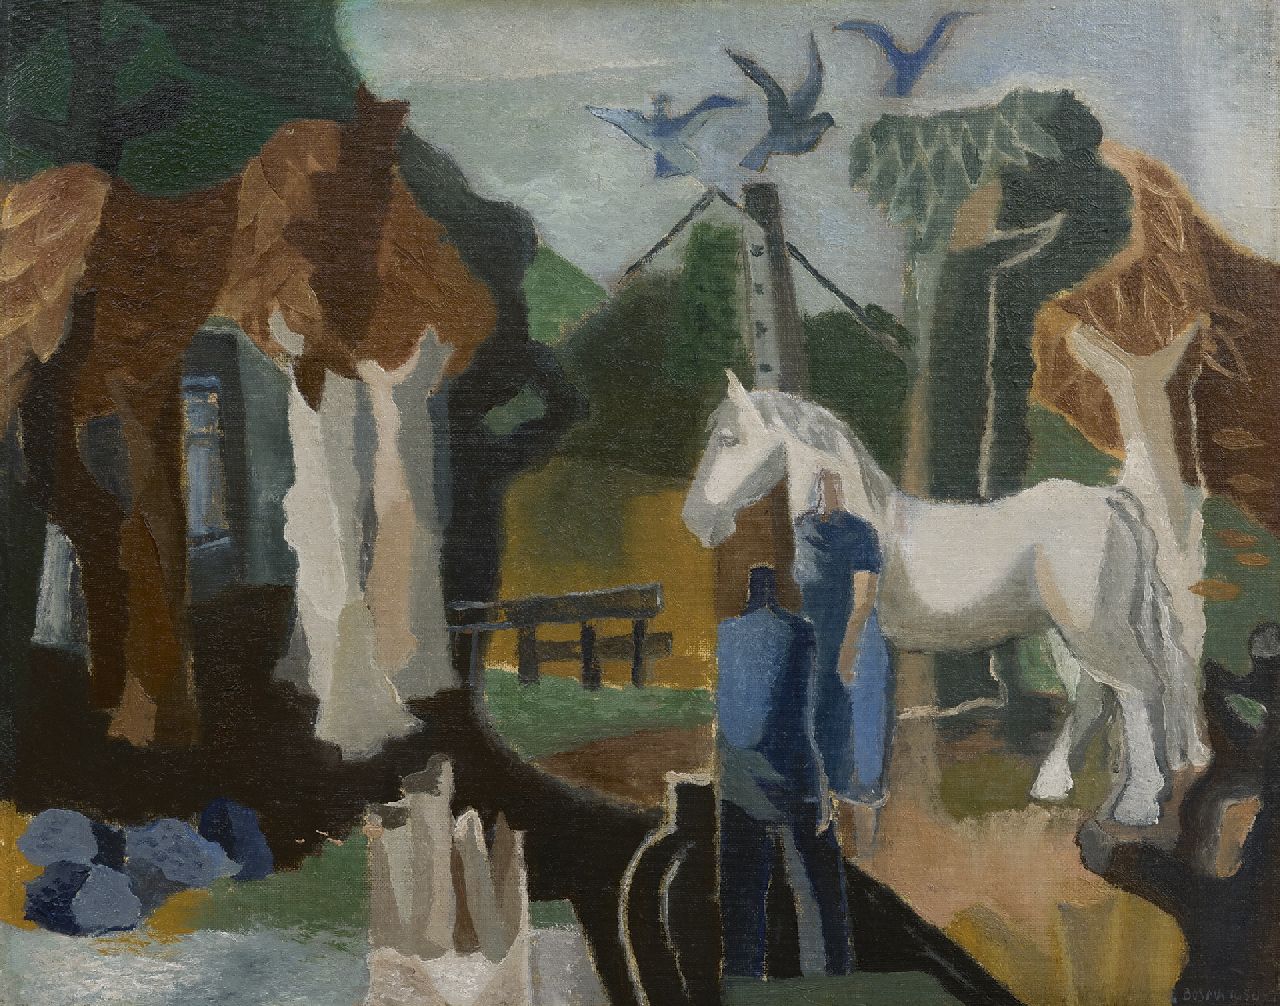 Bosma W.  | Willem 'Wim' Bosma, Man, woman and horse near a farm, oil on board 59.0 x 74.1 cm, signed l.r. and dated 1950